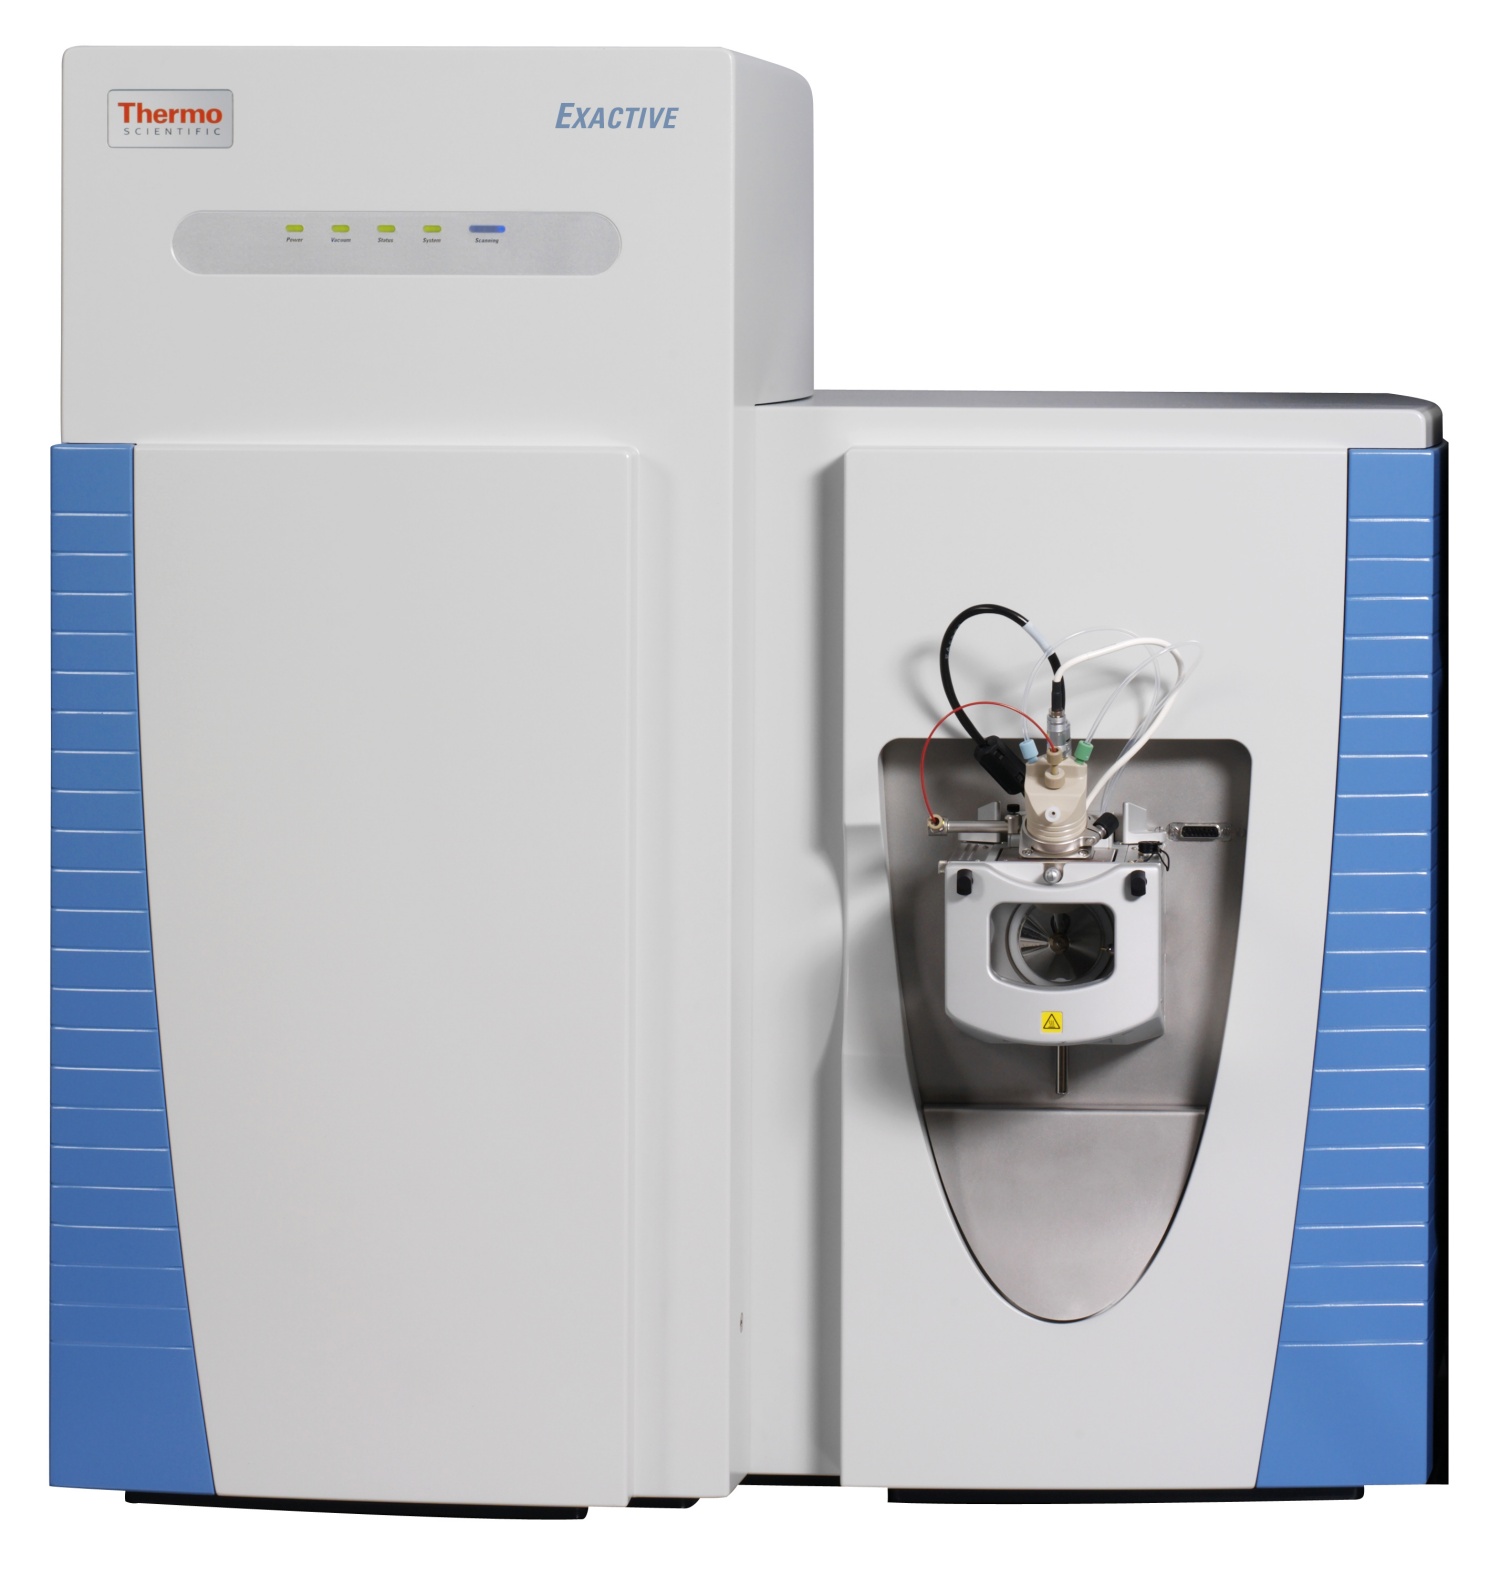 Thermo Fisher Scientific's Exactive LC/MS Wins Best New Product Award at the 2009 Gulf Coast Conference